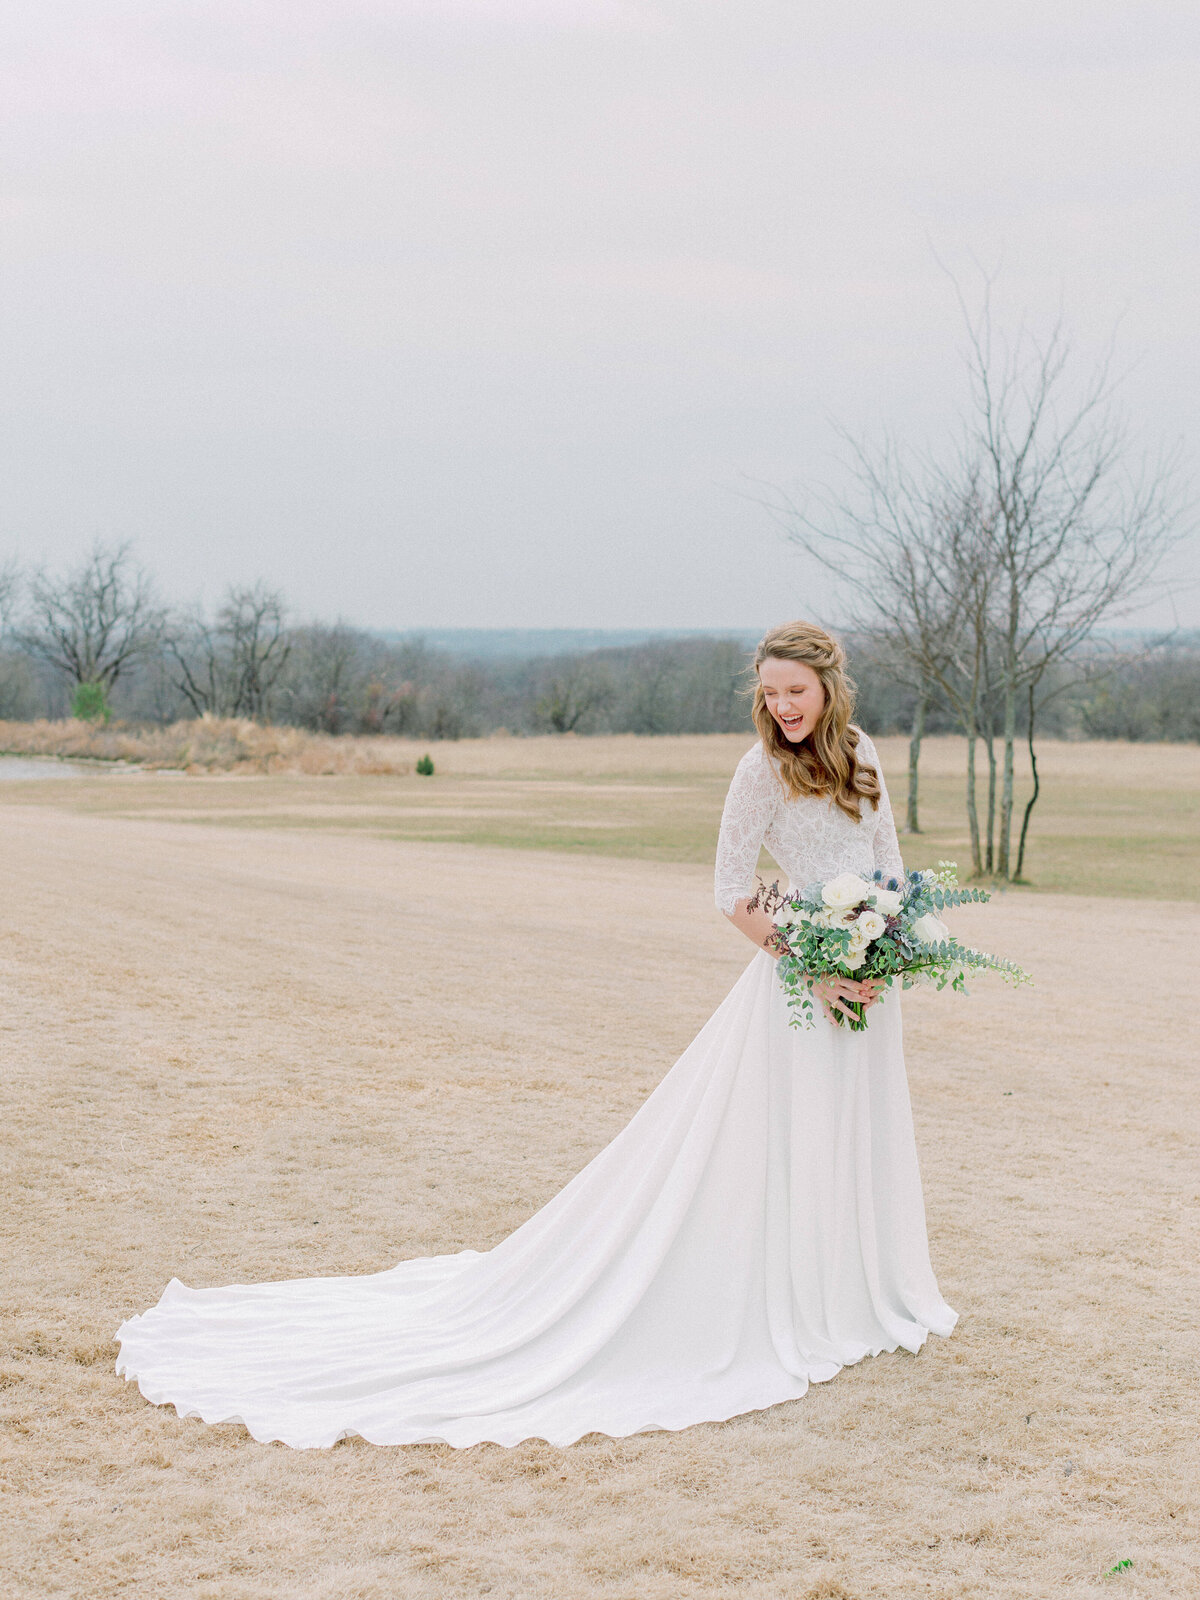 the-nest-at-ruth-farms-wedding-mackenzie-reiter-photography-33